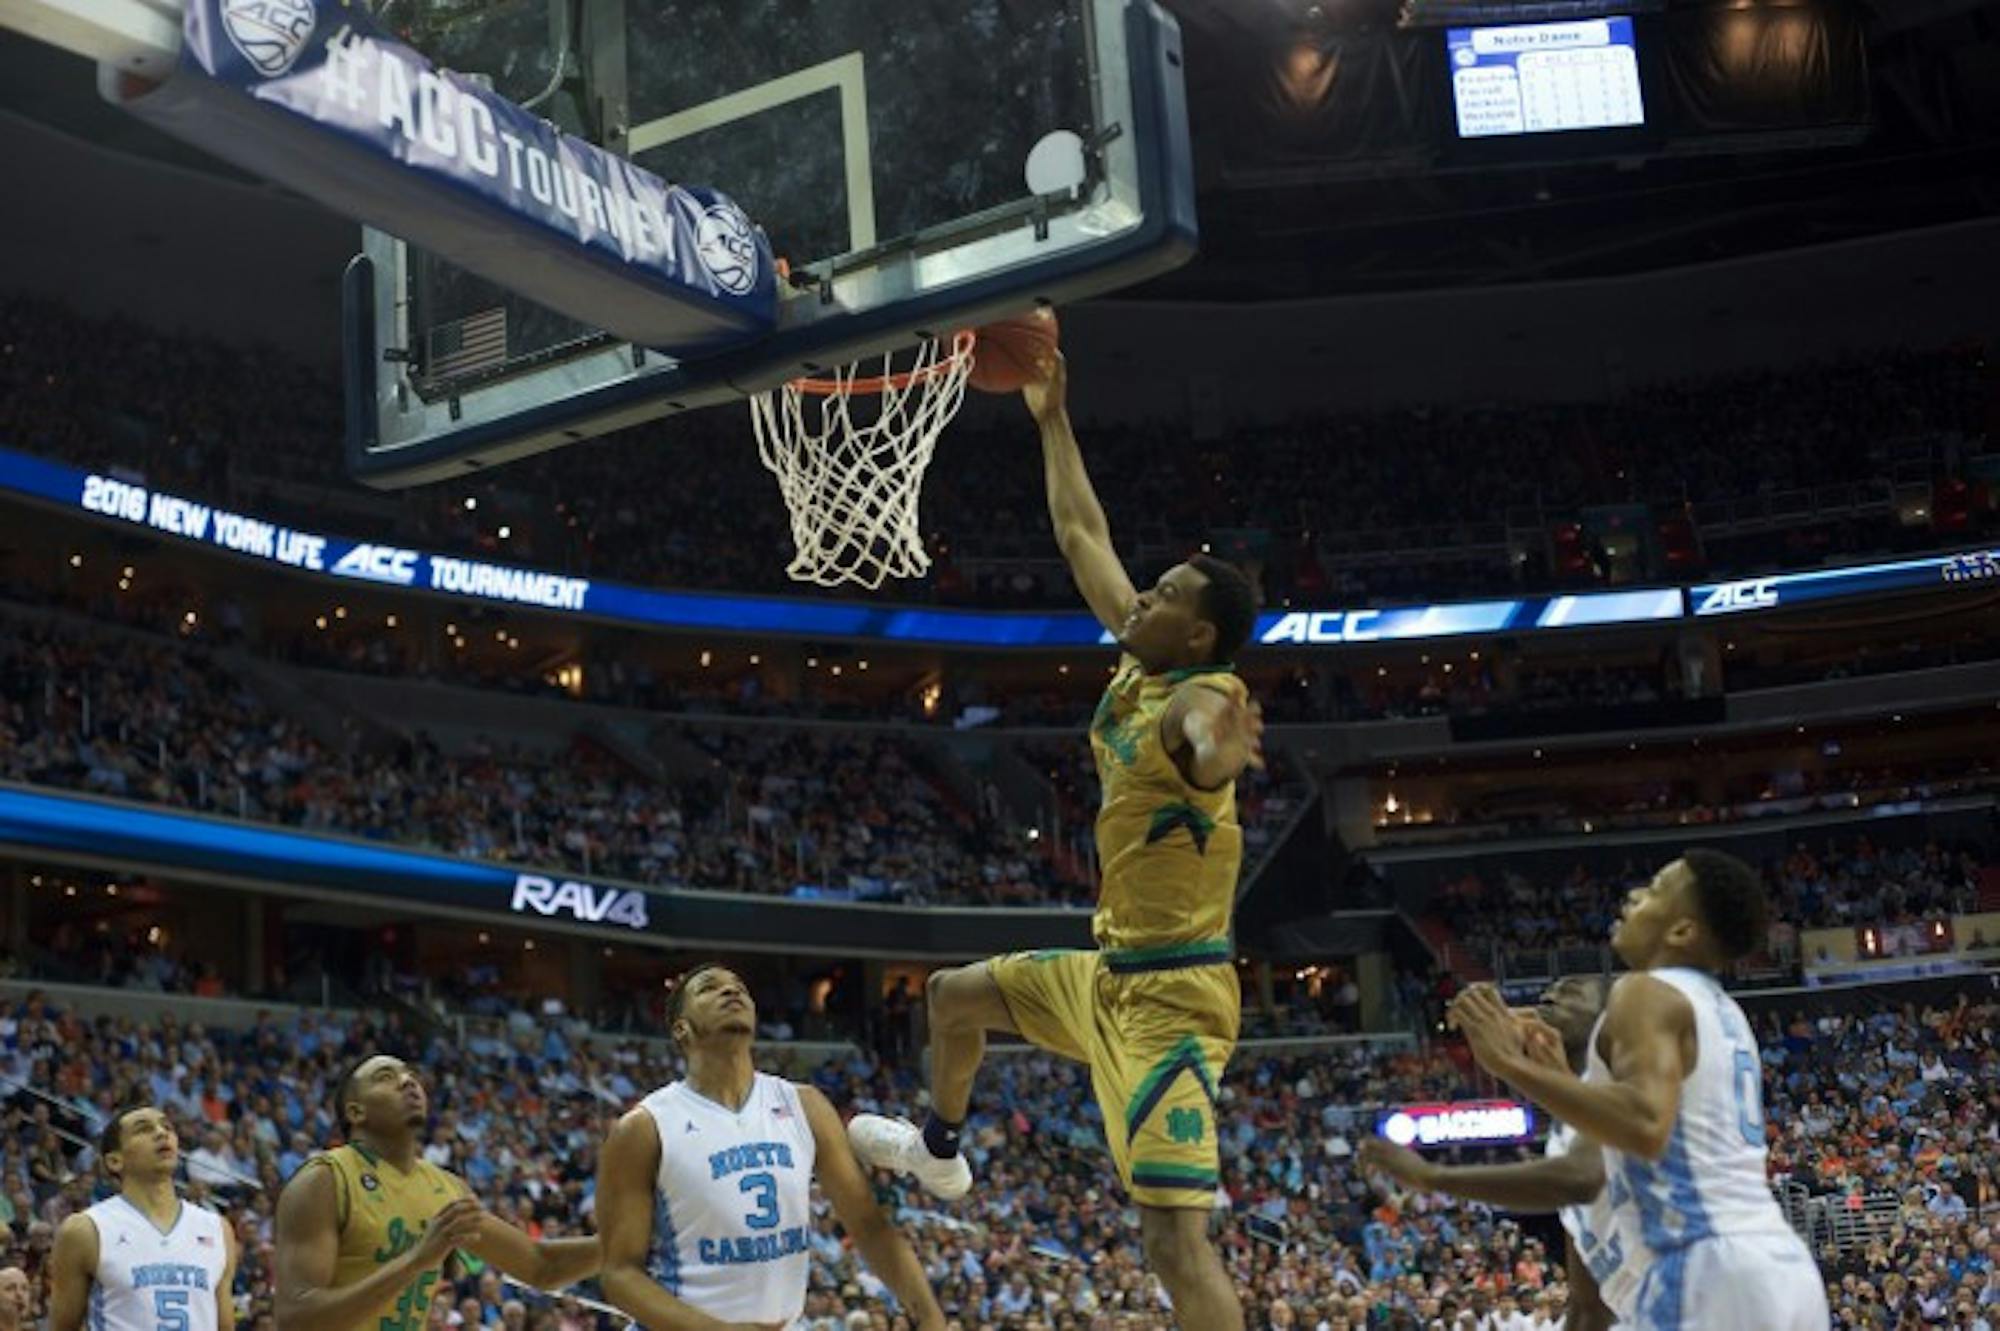 Junior forward V.J. Beachem throws down a dunk during Notre Dame’s 78-47 loss to North Carolina in March 11’s ACC tournament semifinal.